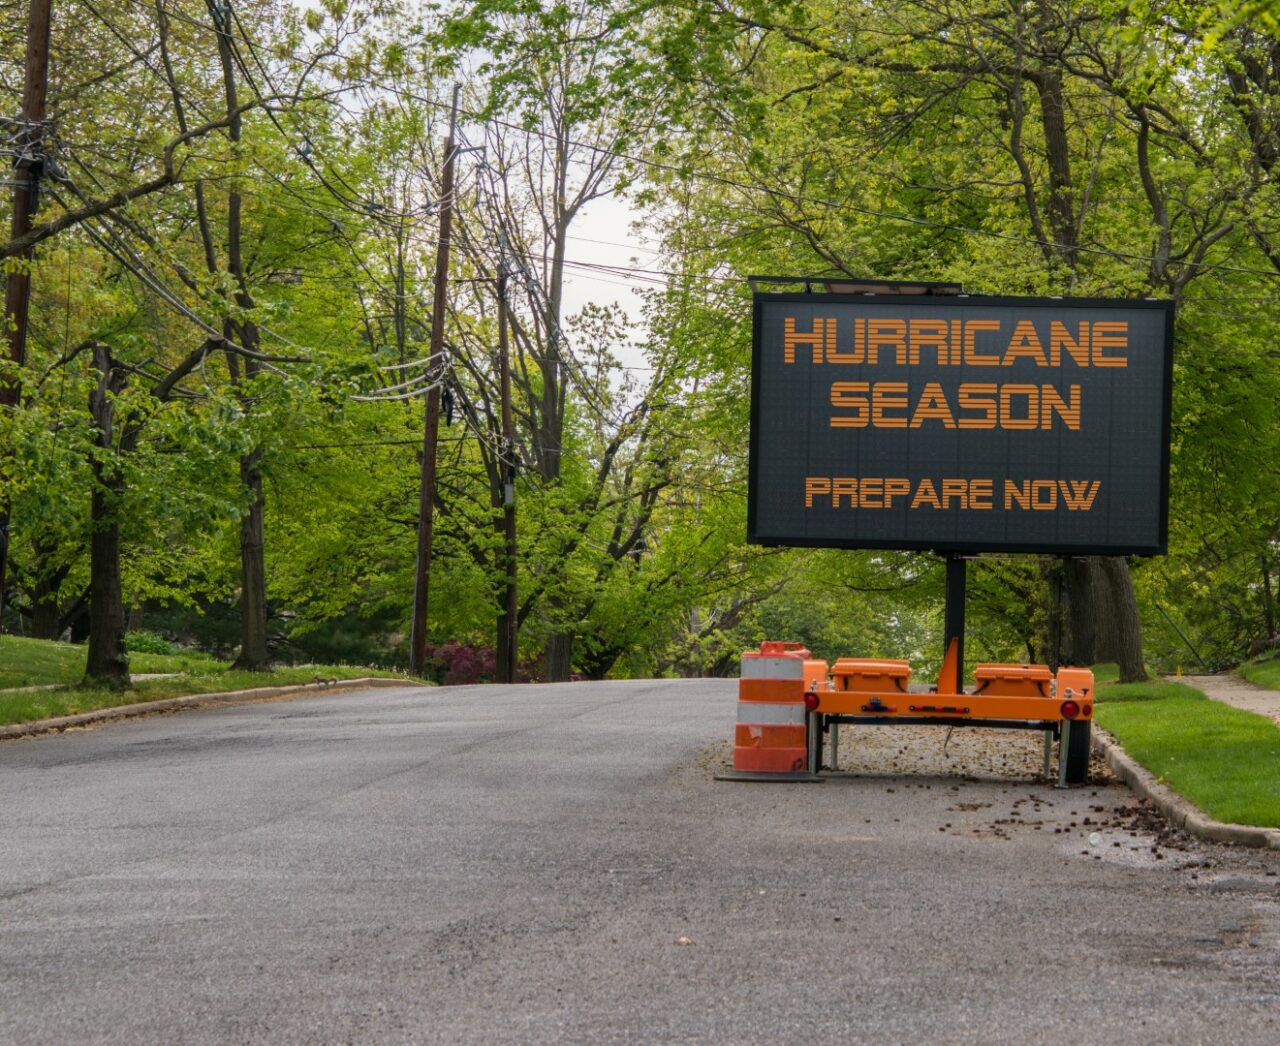 Digital electronic mobile road sign that says Hurricane Season prepare now, on the side of a tree lined road